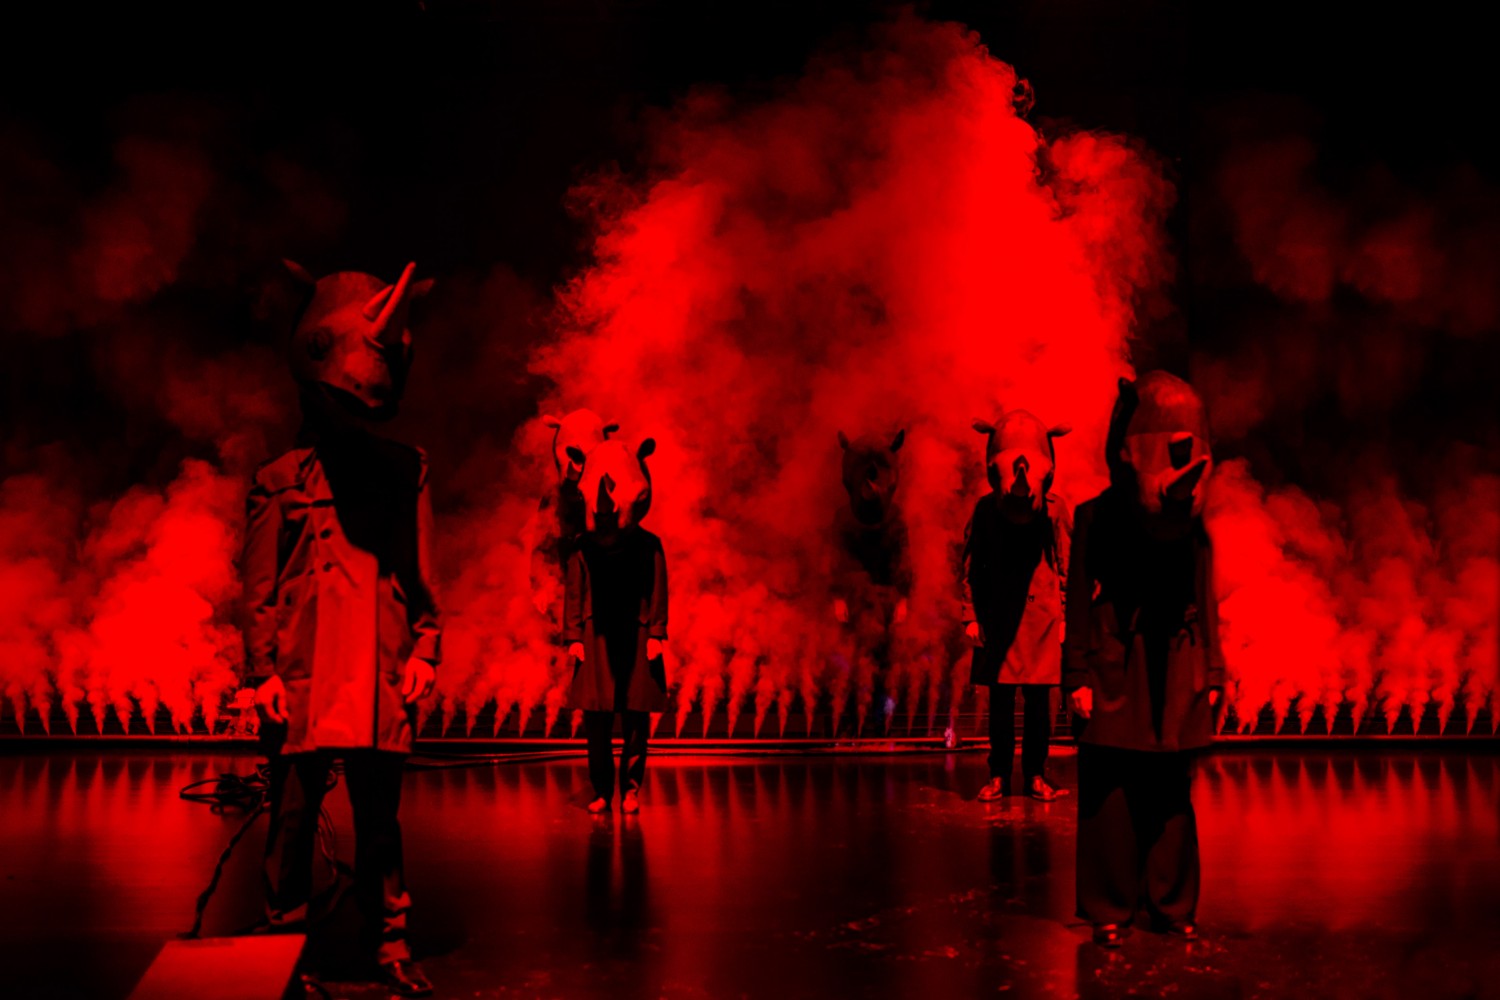 Actors with rhinoceros costumes standing on a stage filled with red light and smoke